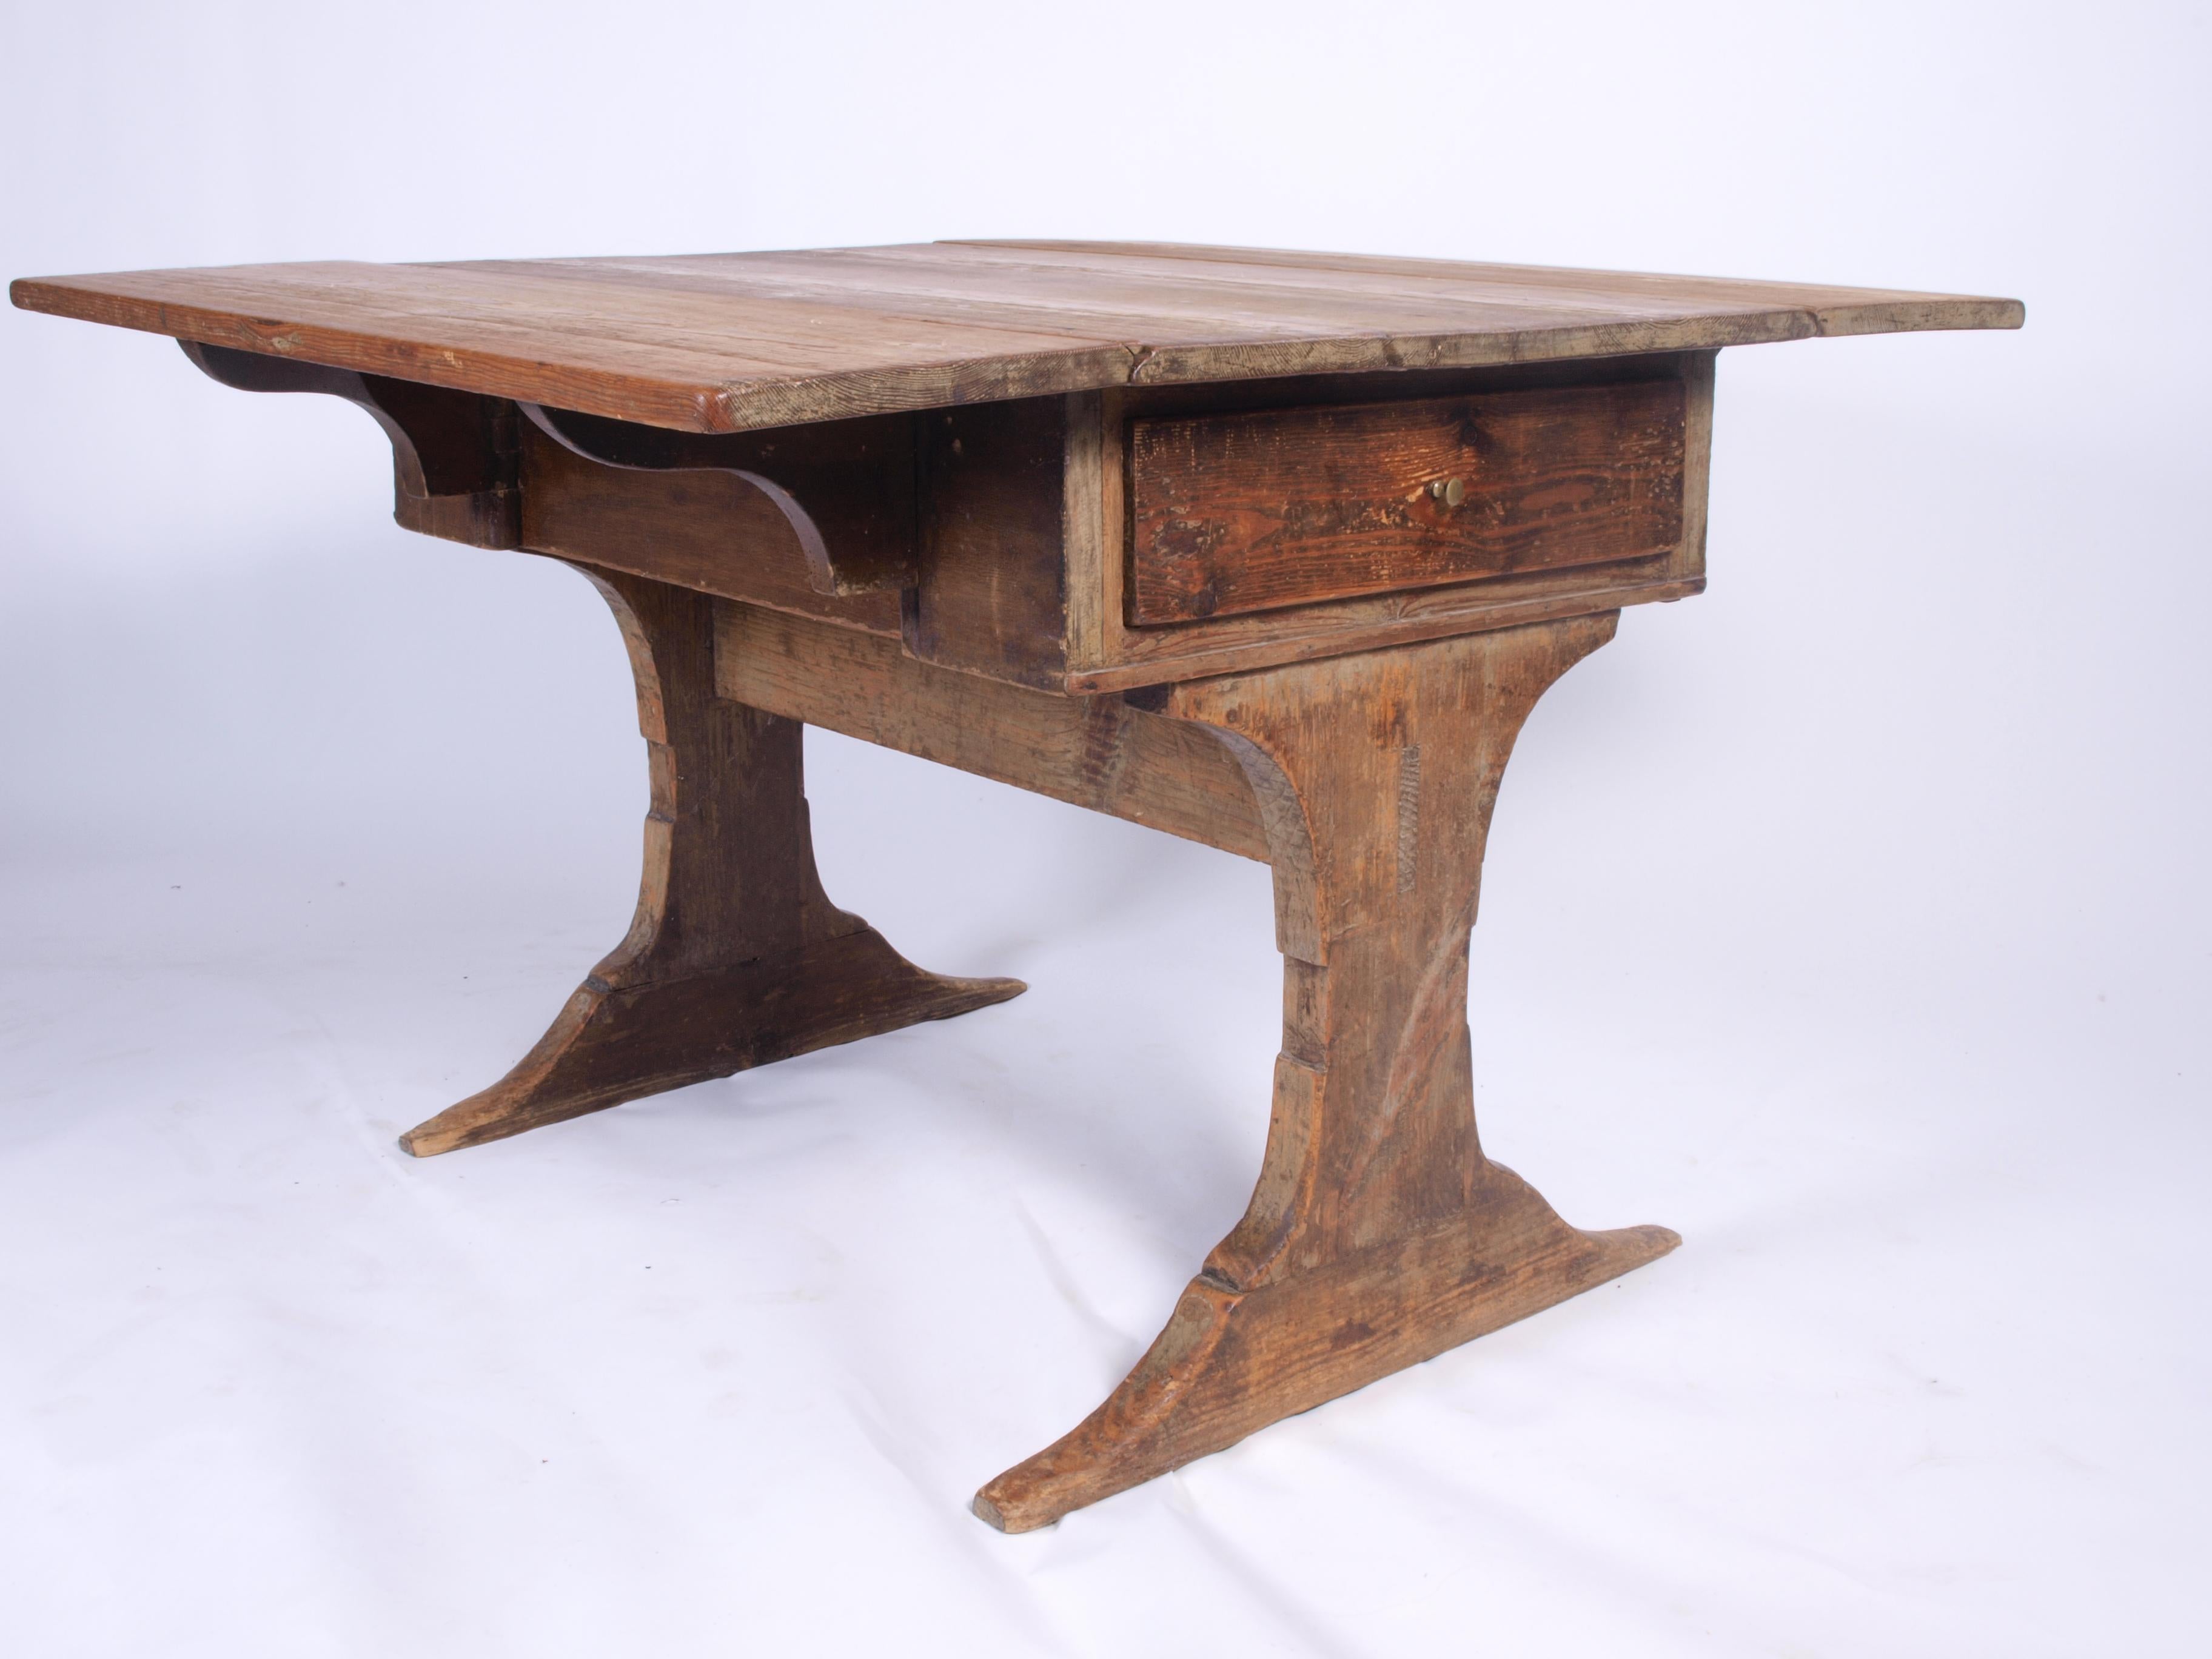 This old table hails from pre-1890 rural Denmark, commonly found in kitchens with foldable side extensions for added space. A distinct piece, it carries the charm of a work of art.

While originally meant for the kitchen, it can now serve as a